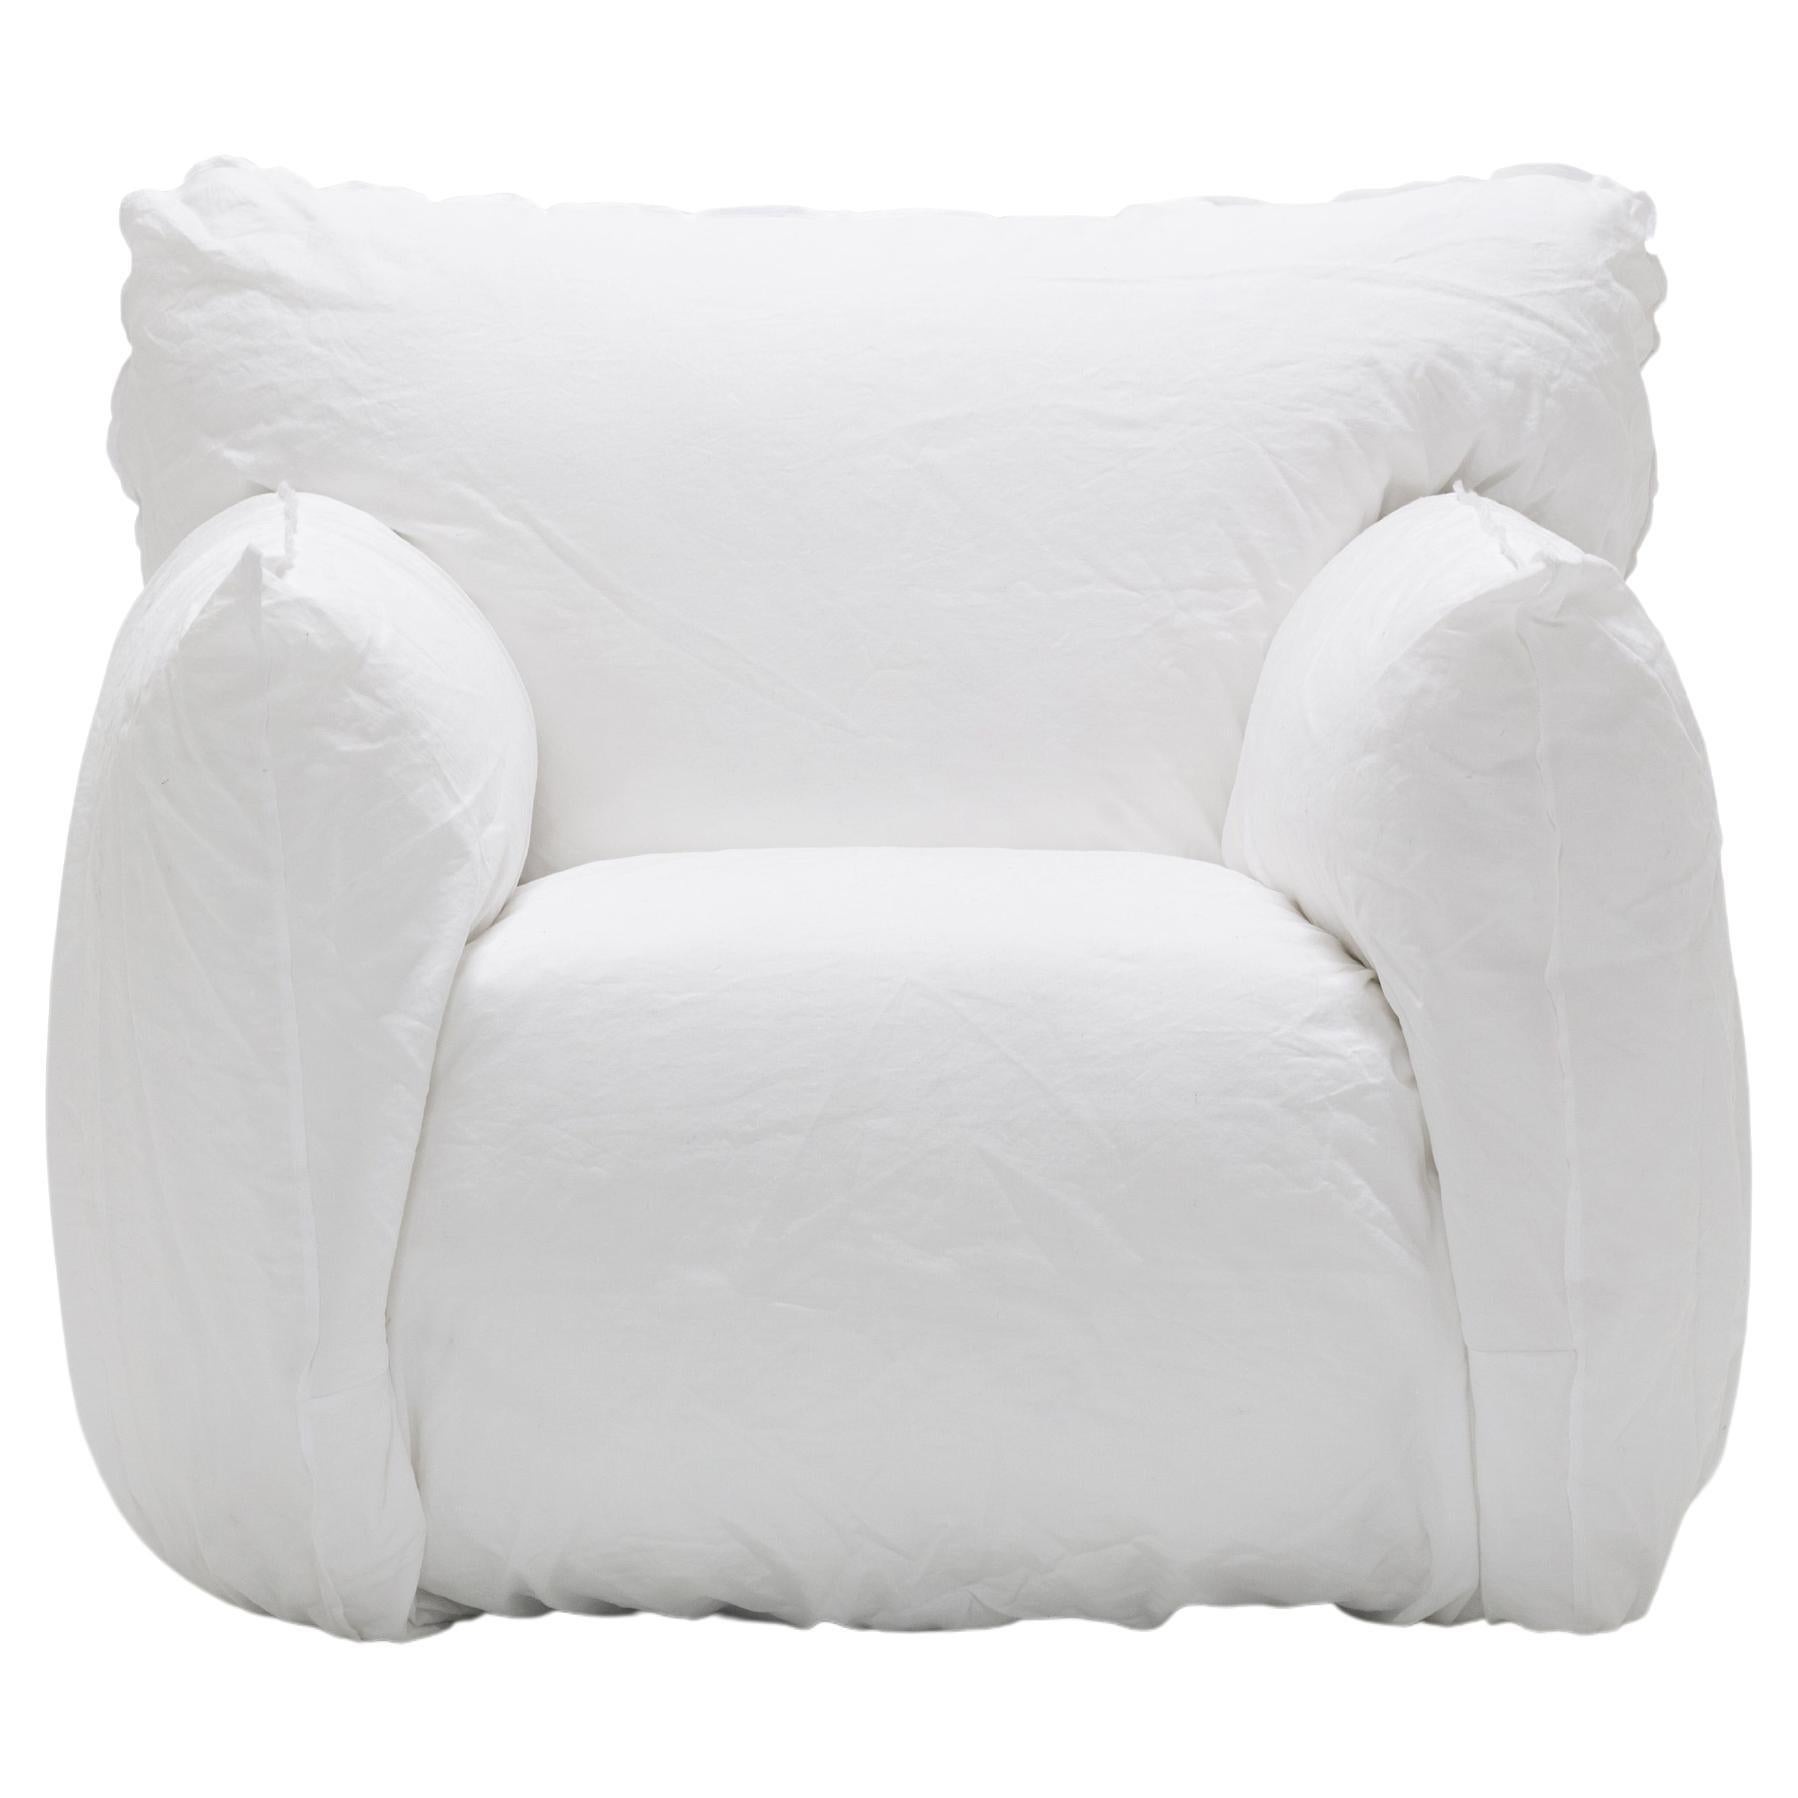 Gervasoni Nuvola 05 Lounge Chair in White Linen Upholstery by Paola Navone For Sale